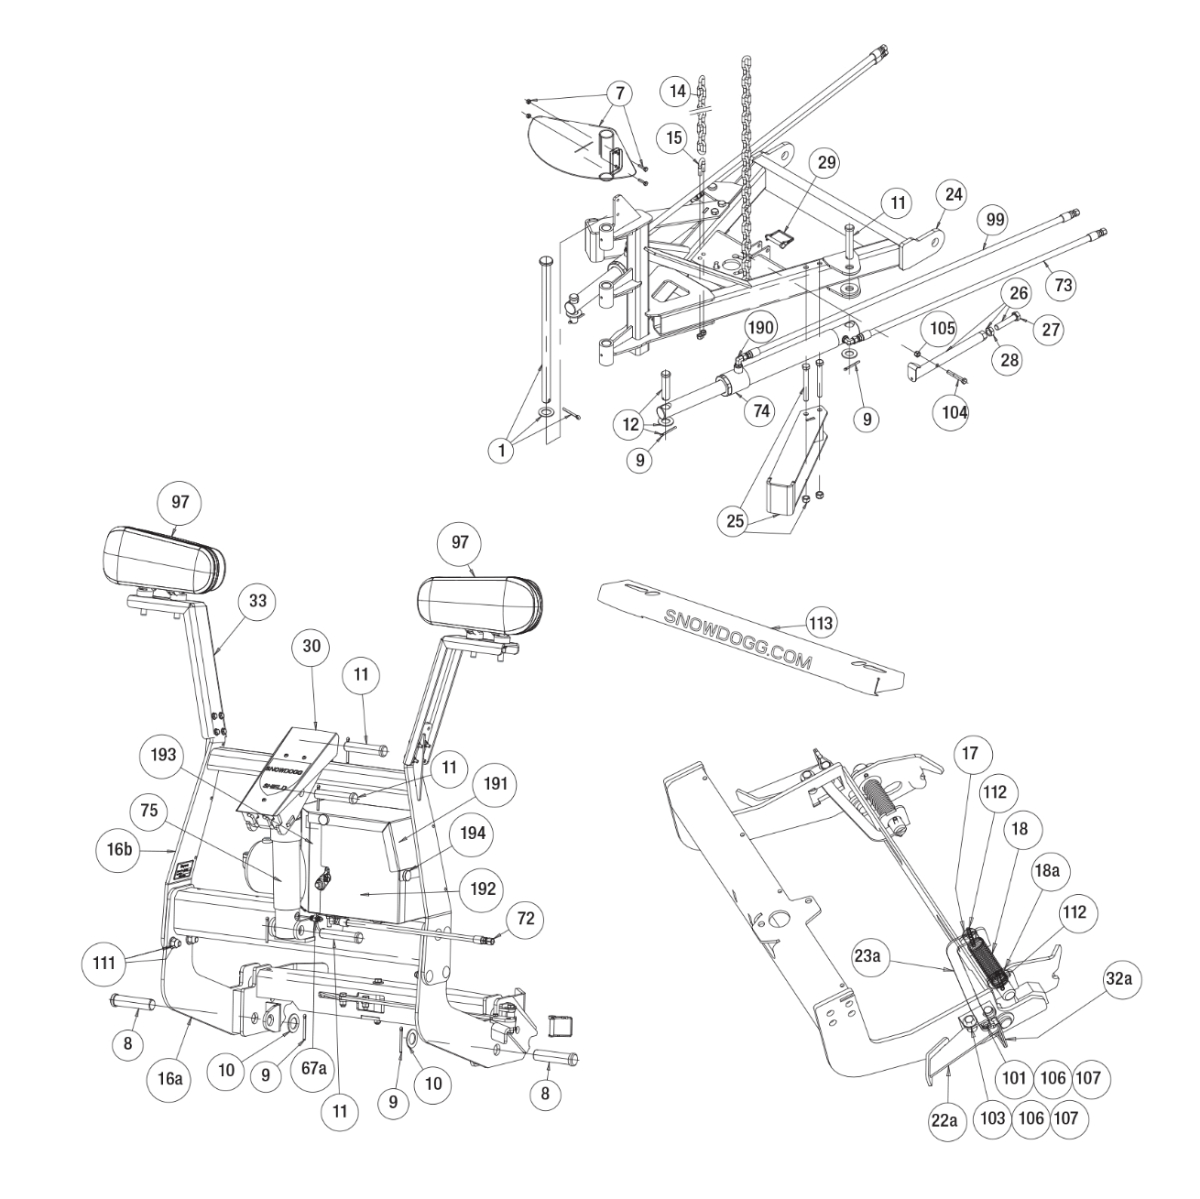 Buyers SnowDogg Discontinued Model VXF95 Lift Frame Diagram